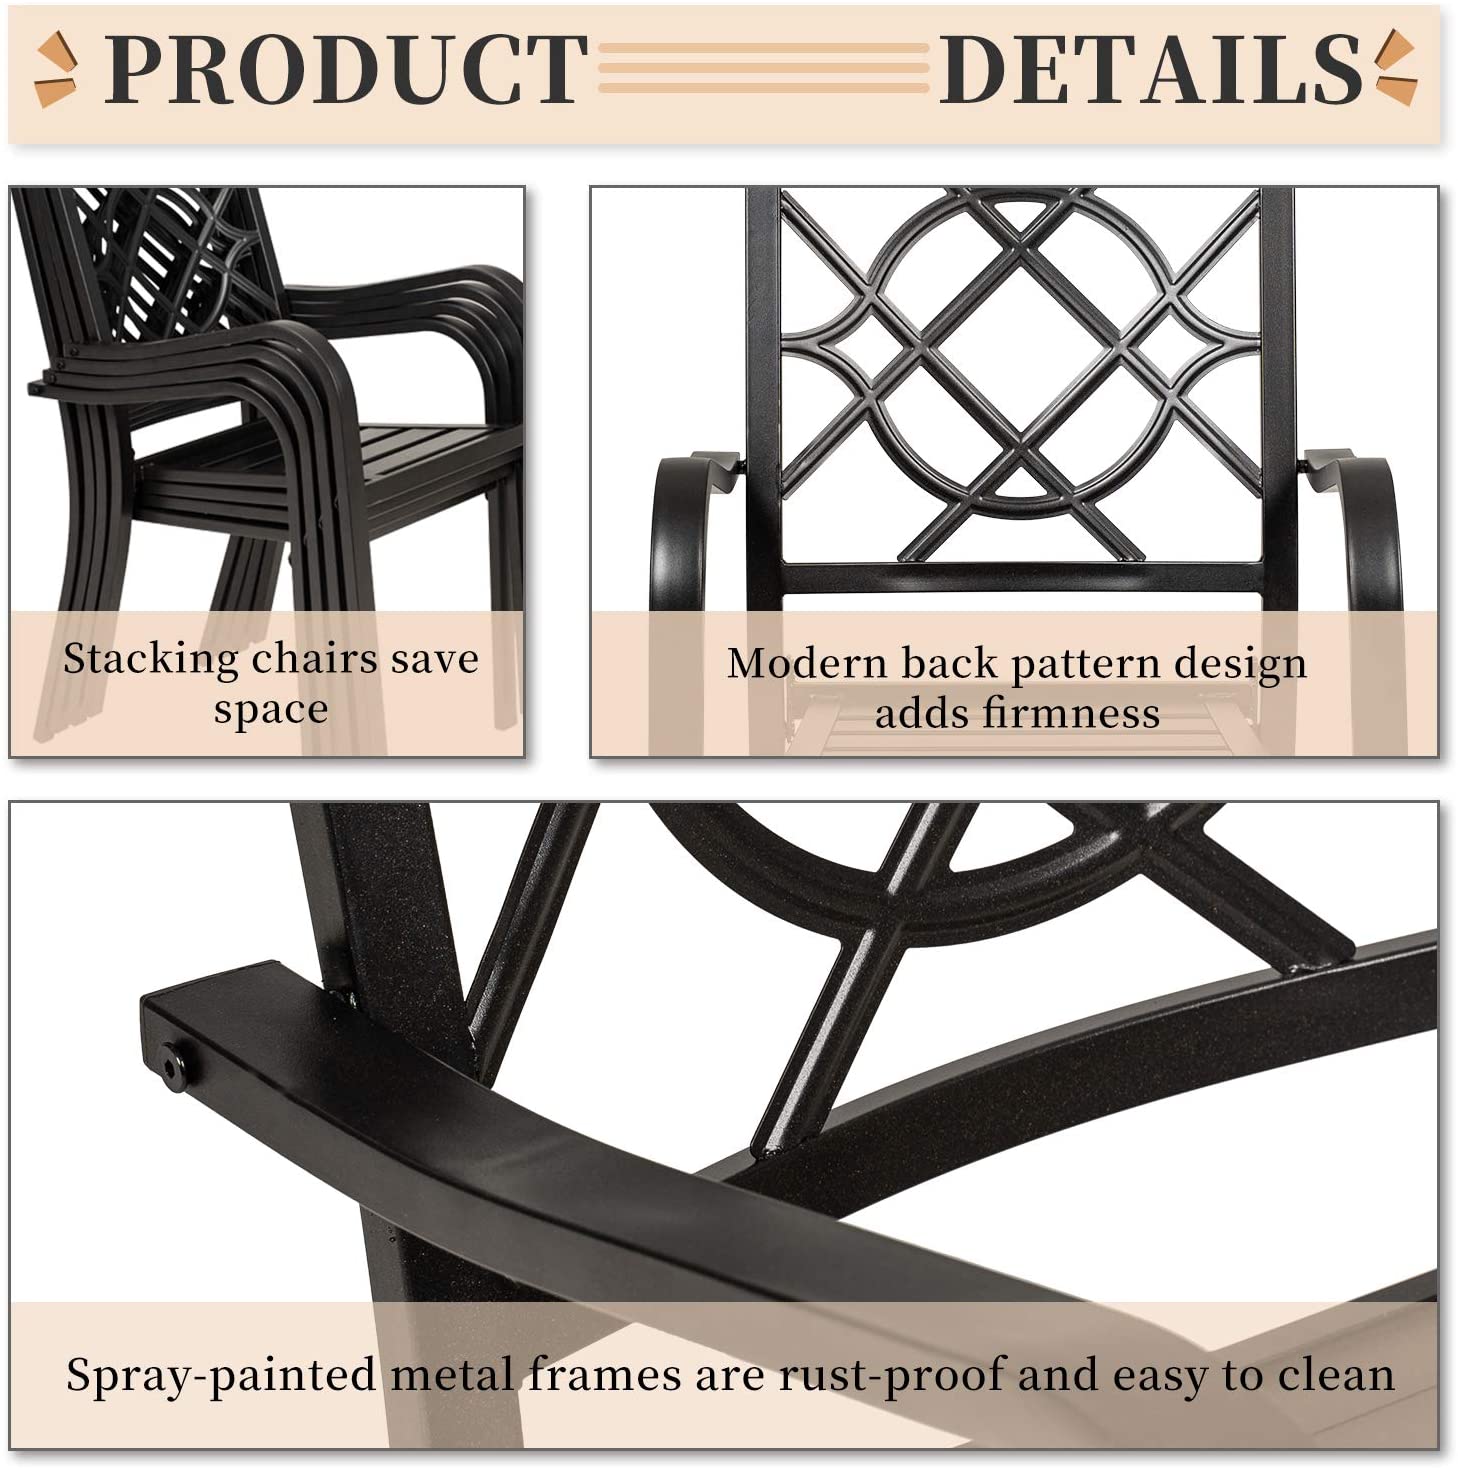 SOLAURA Outdoor Patio Stackable Wrought Iron Dining Chairs Set of 4- Black - image 4 of 7